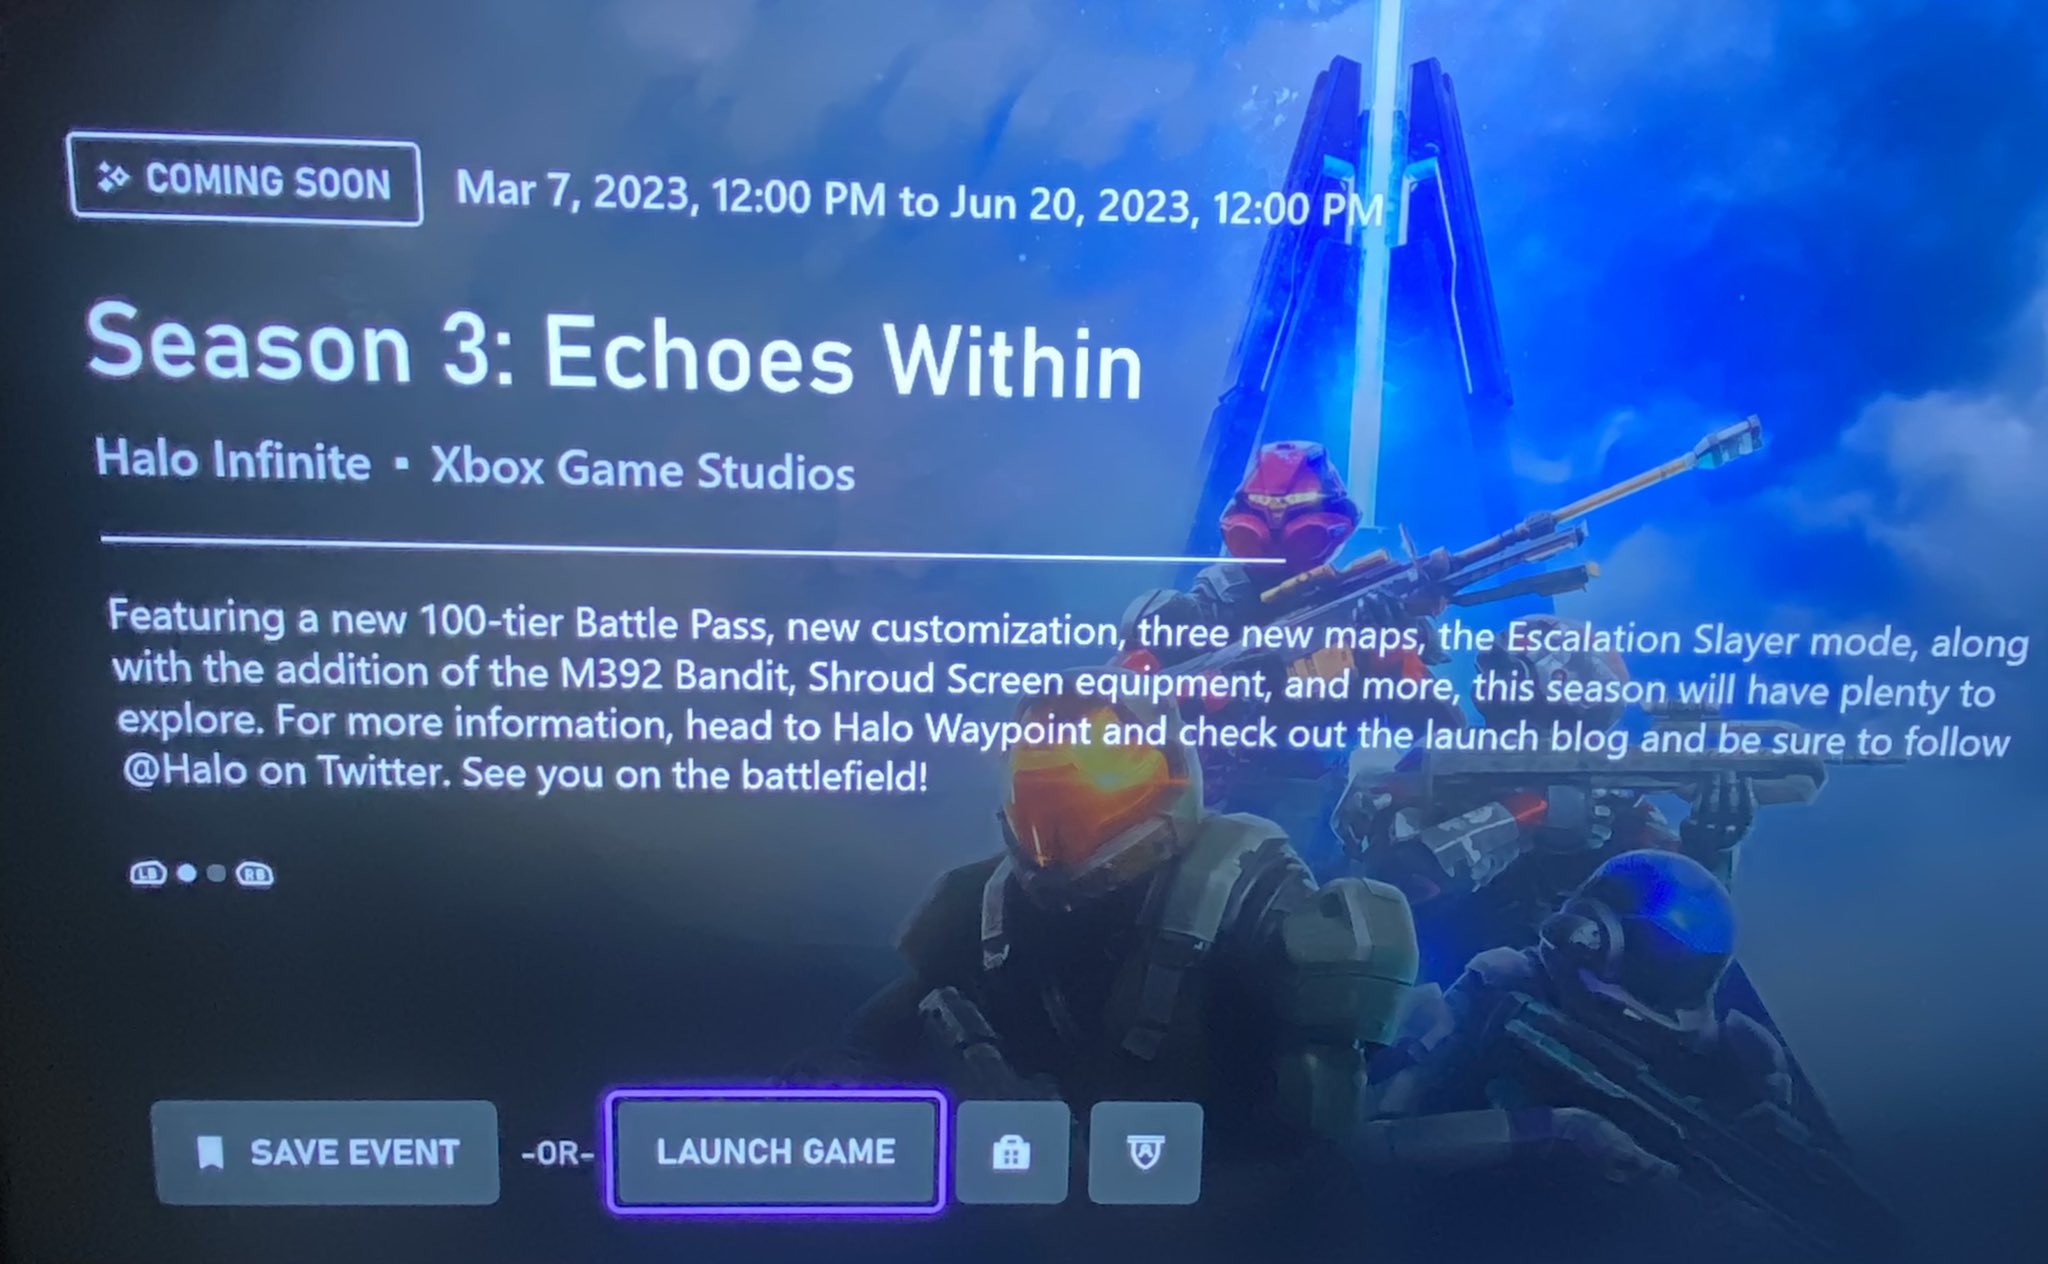 Halo Infinite Season 3: Echoes Within confirmed dates on the Xbox Events app.